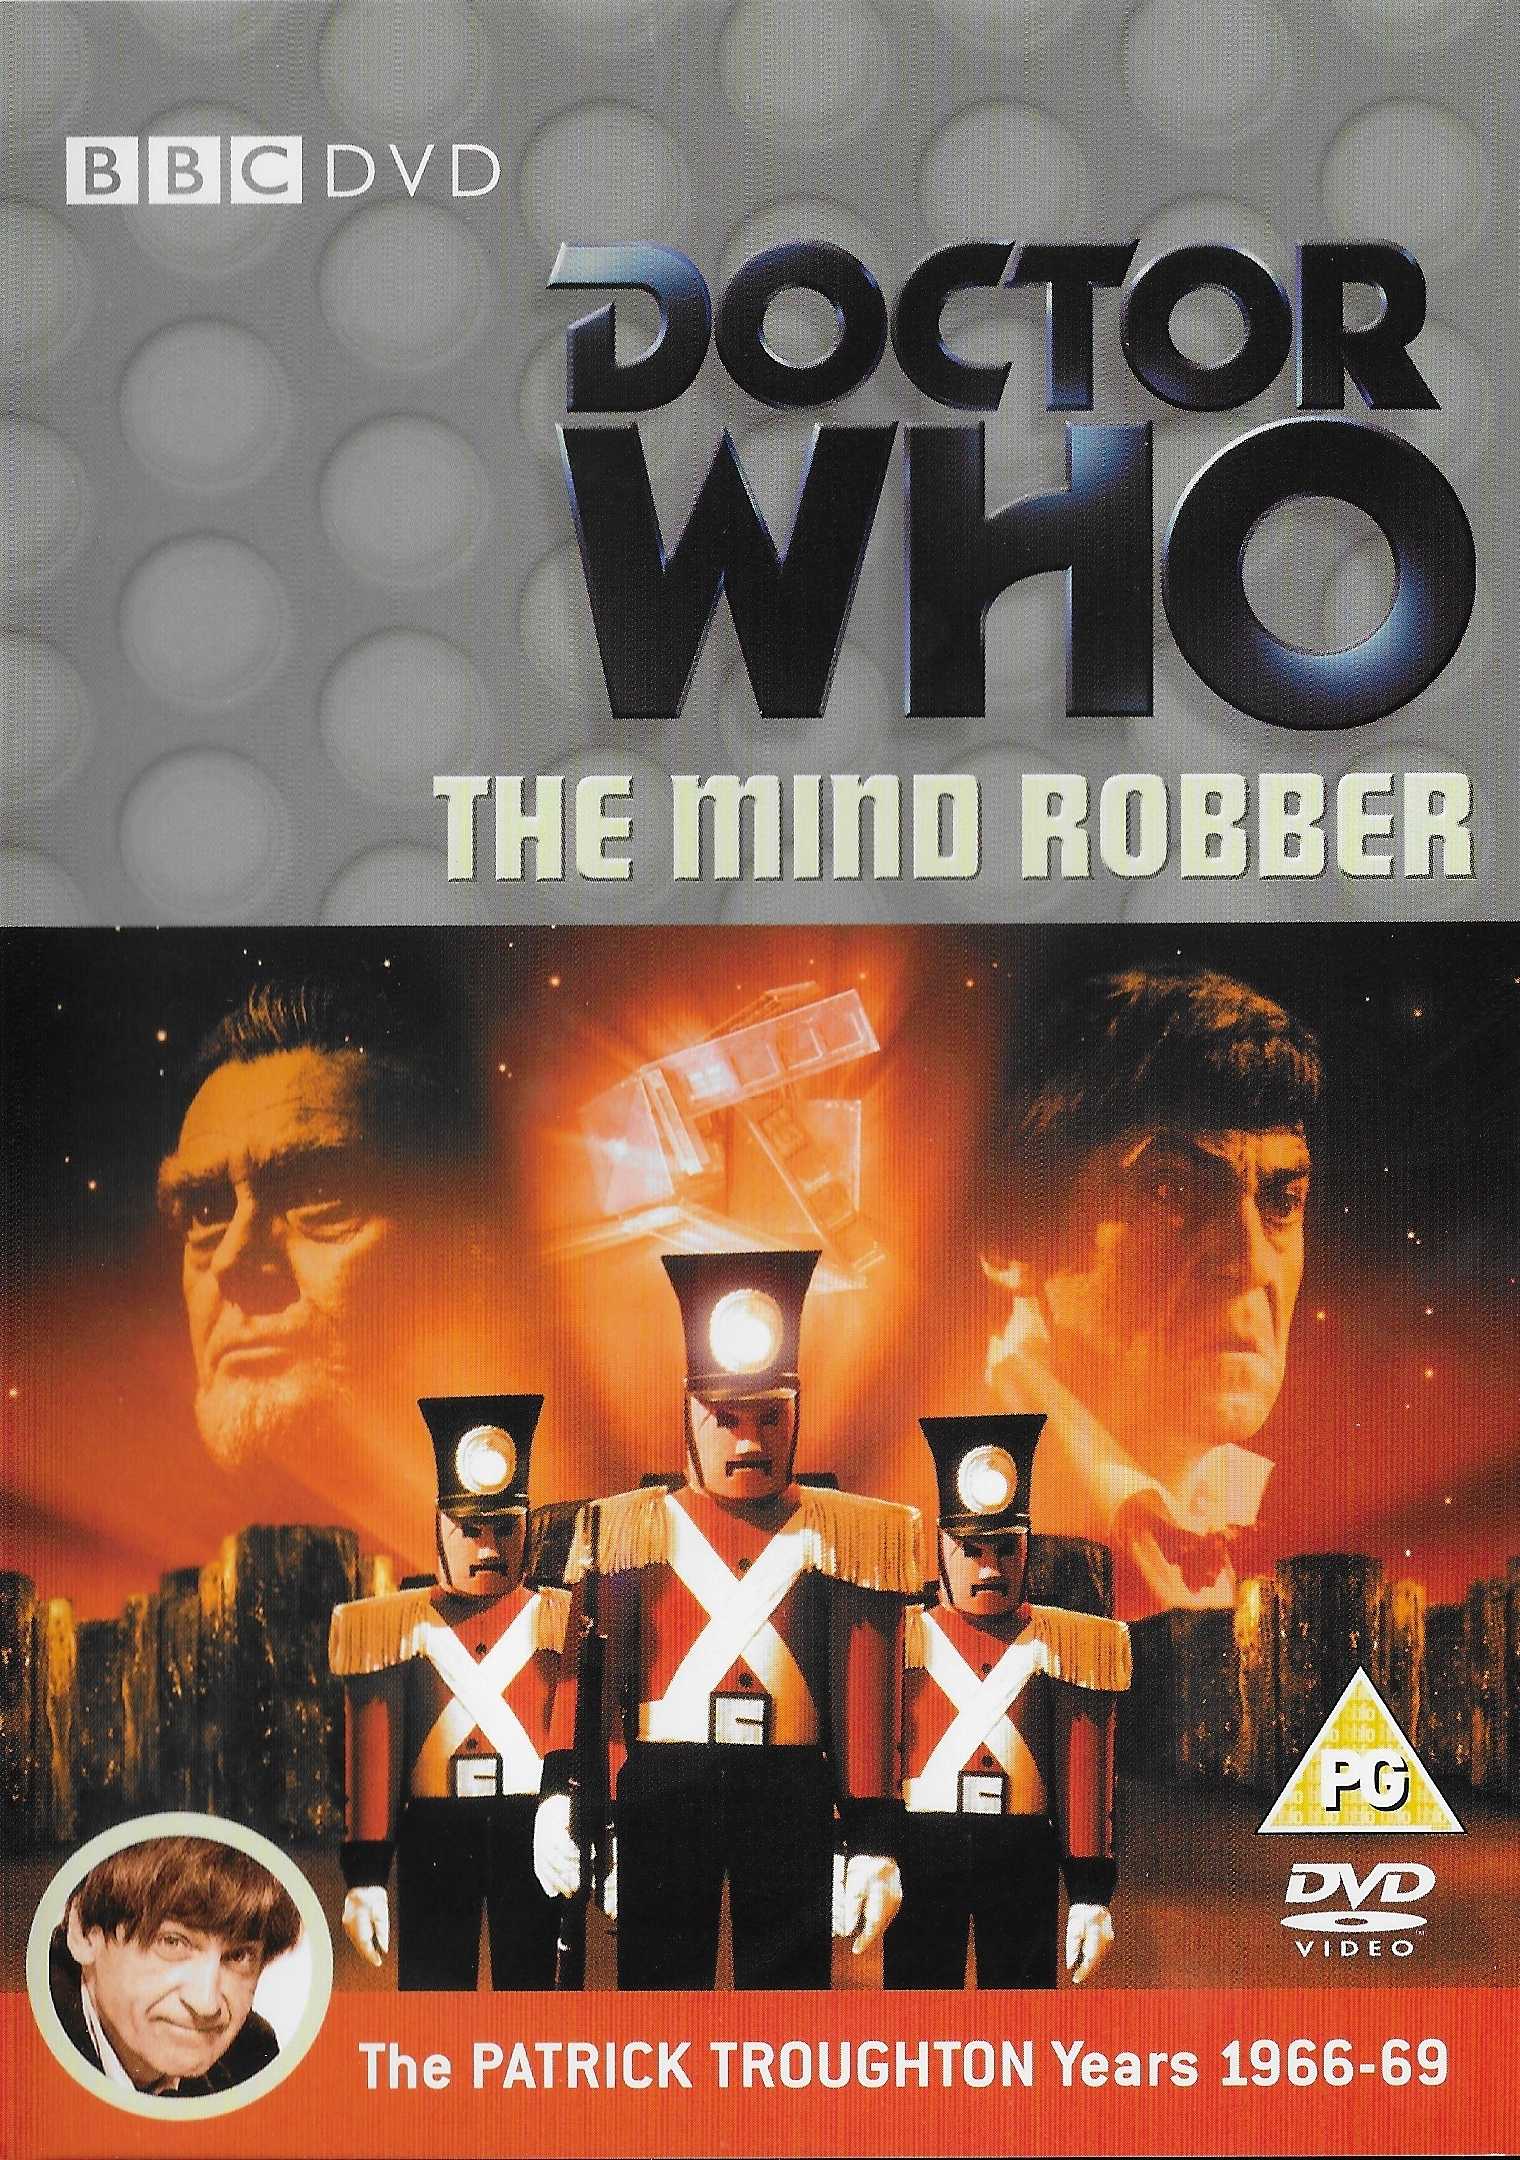 Picture of BBCDVD 1358 Doctor Who - The mind robber by artist Peter Ling from the BBC records and Tapes library